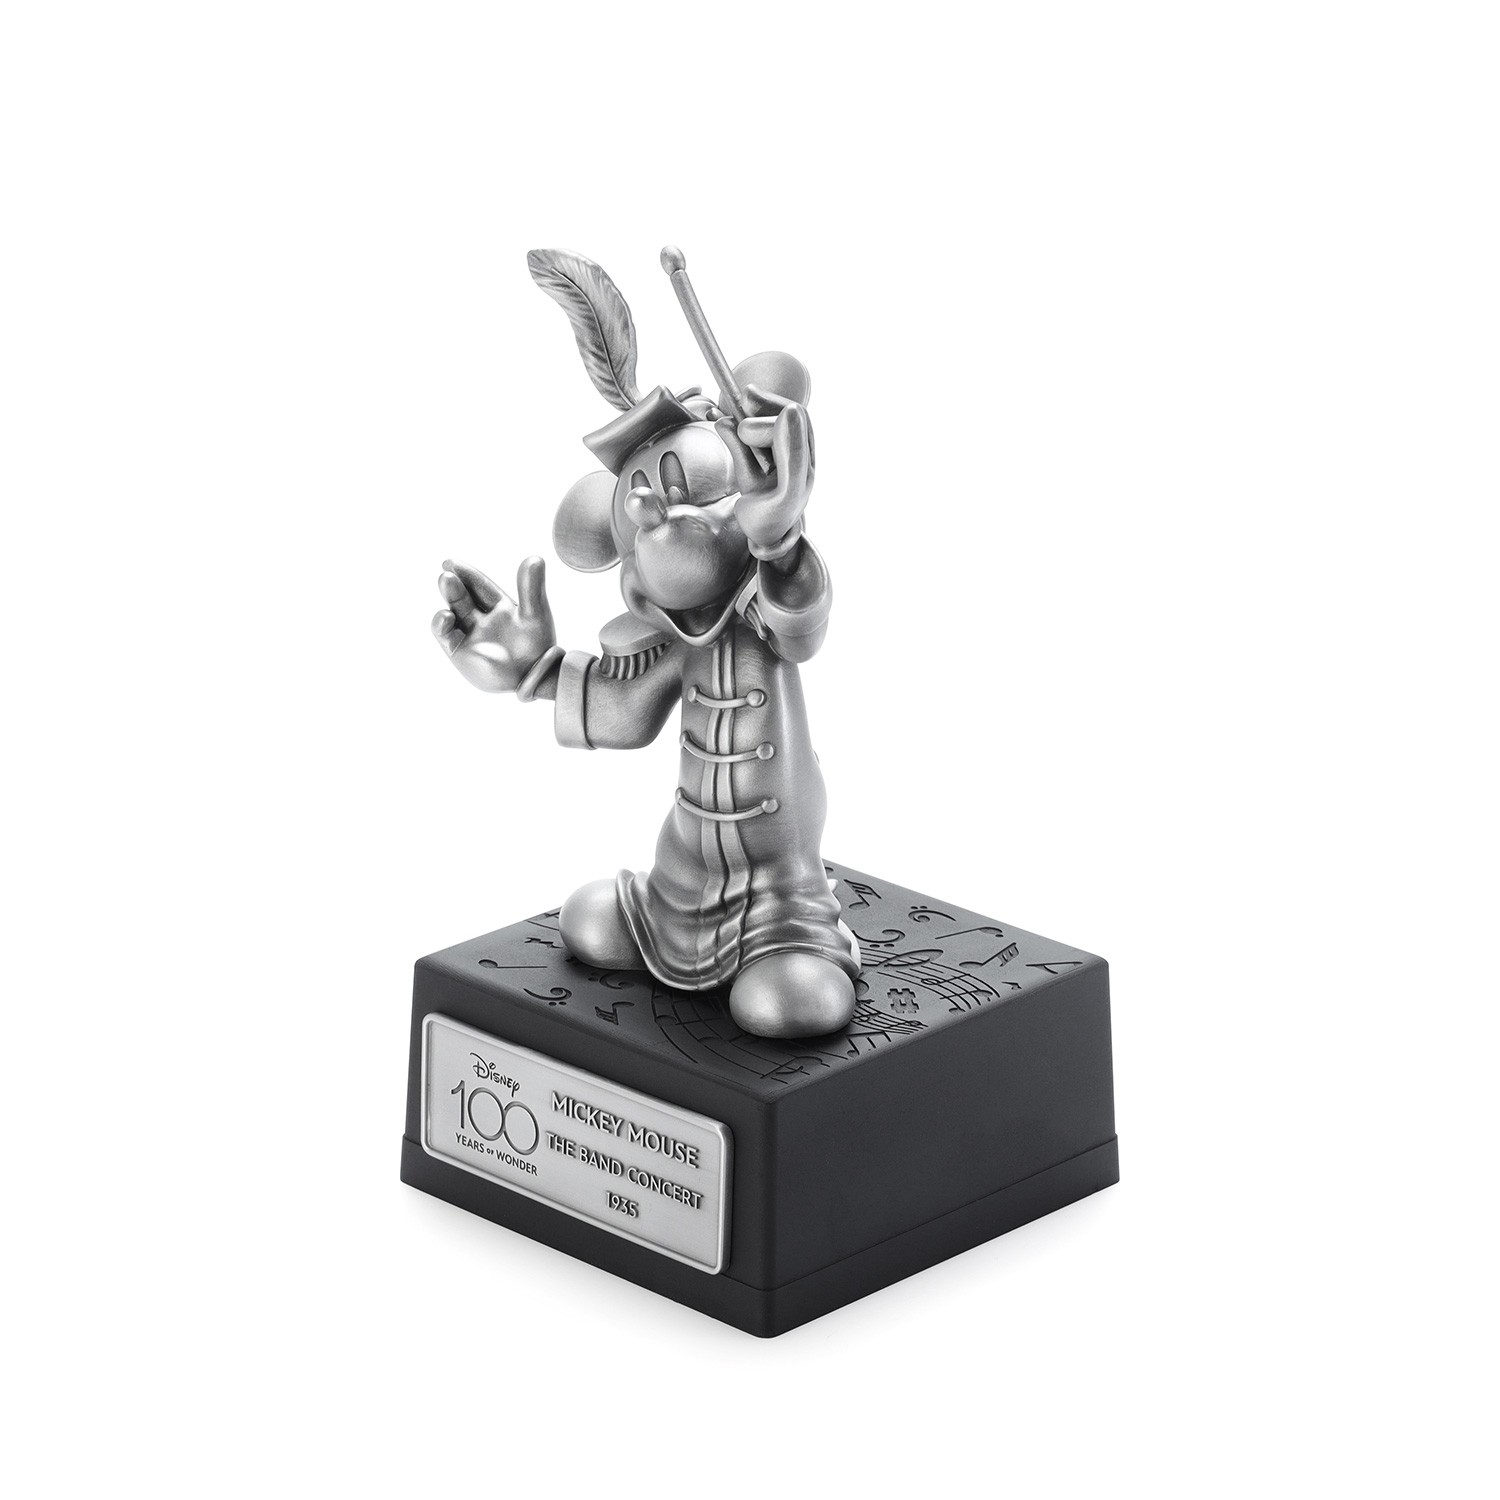 Mickey Mouse 1935 Figurine (Prototype Shown) View 3